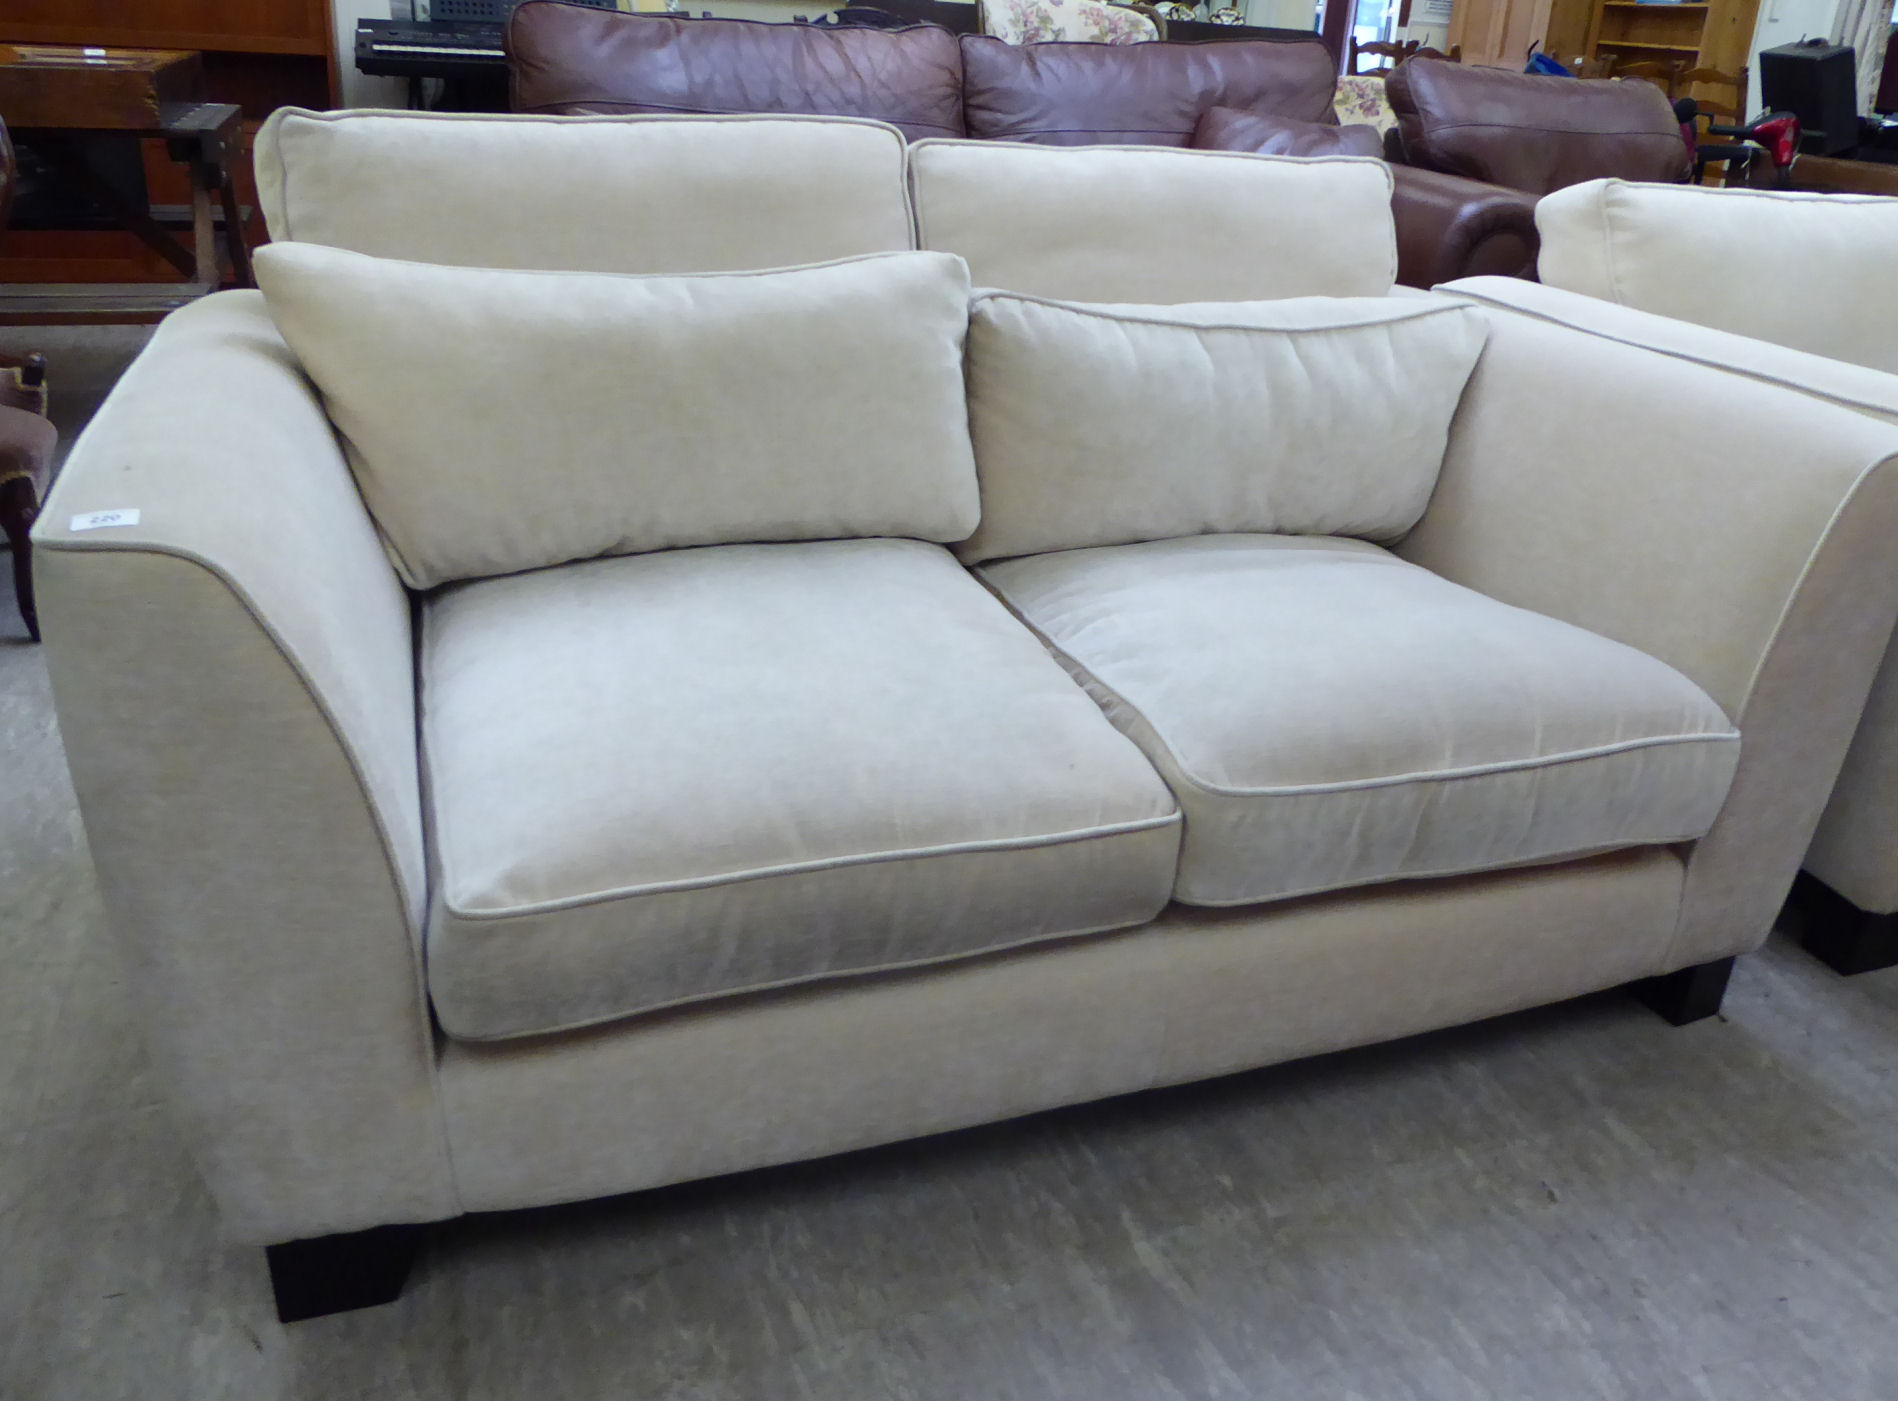 A modern two person settee, upholstered in cream coloured fabric,